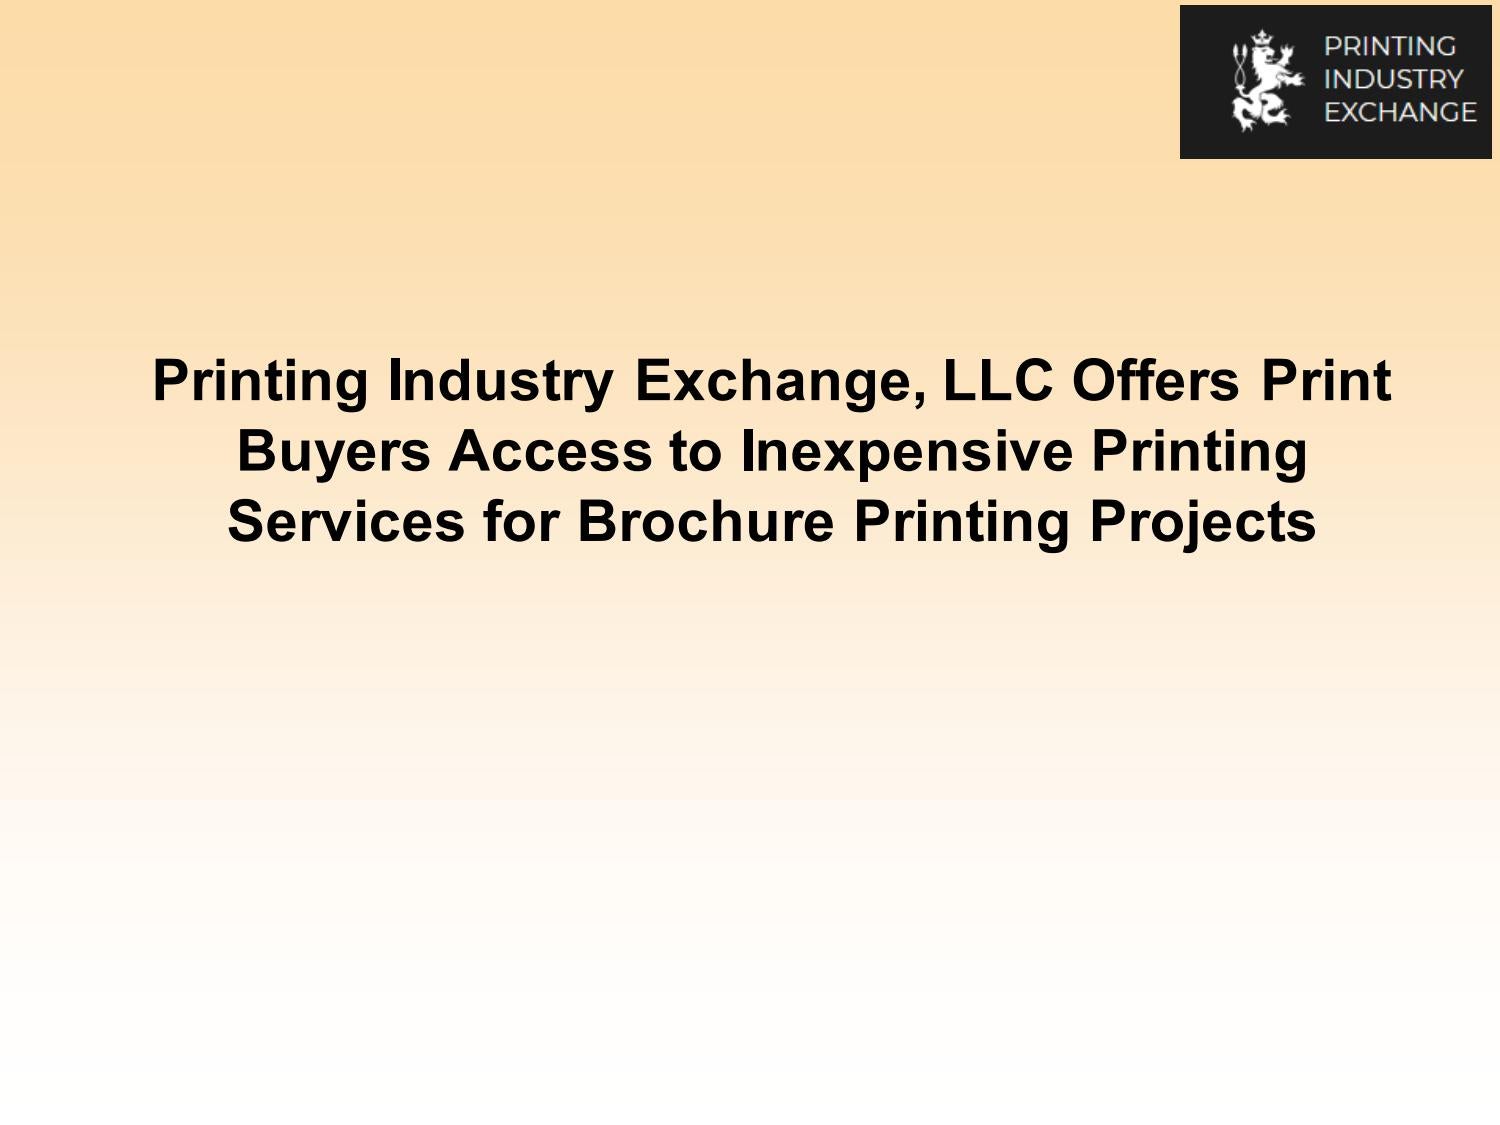 Printing Industry Exchange, LLC Offers Access to Affordable Printing Services Online 9